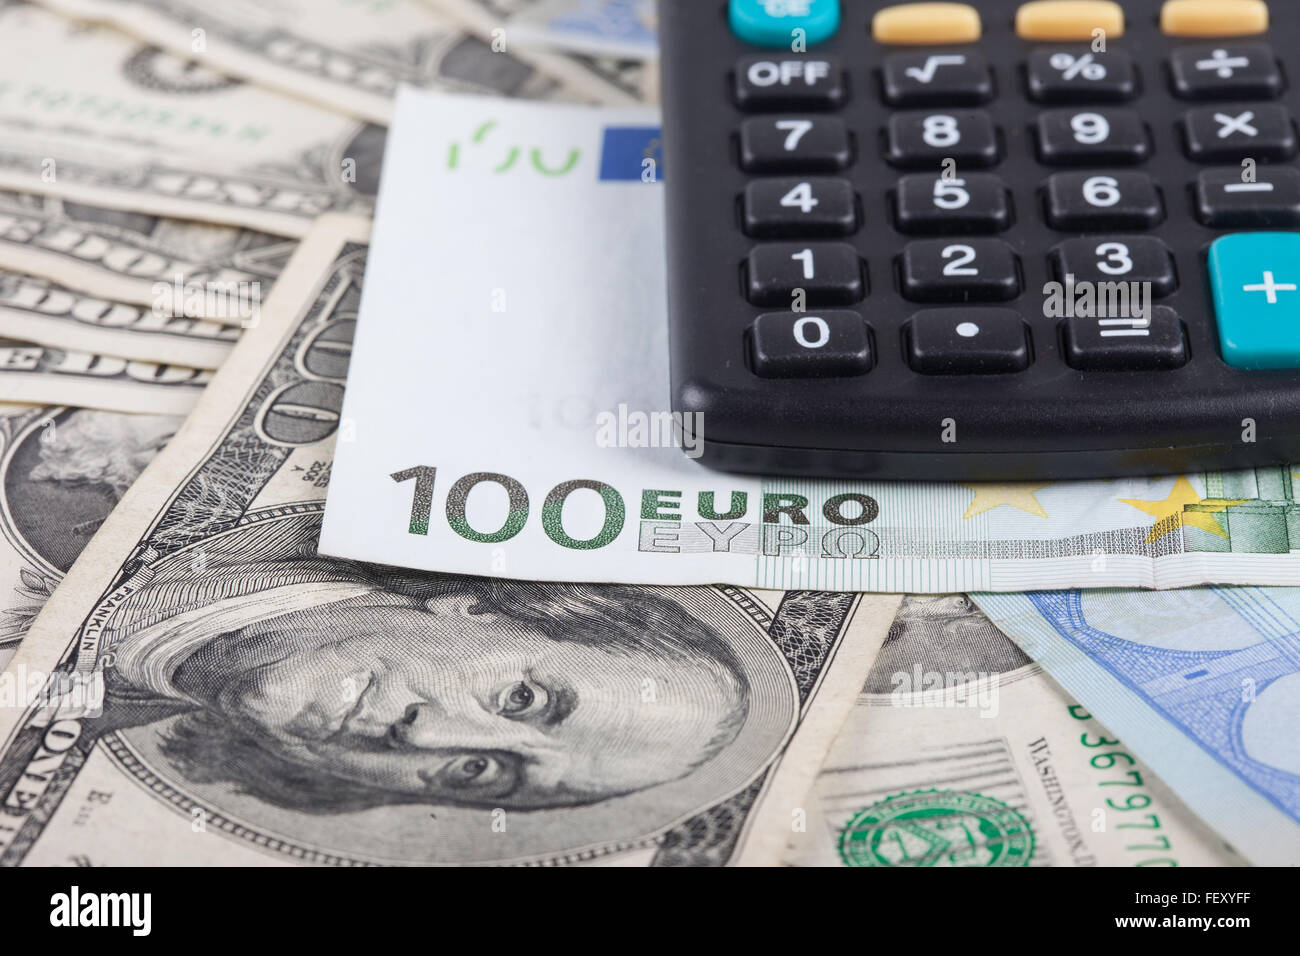 calculator and banknotes of dollars, euro background Stock Photo